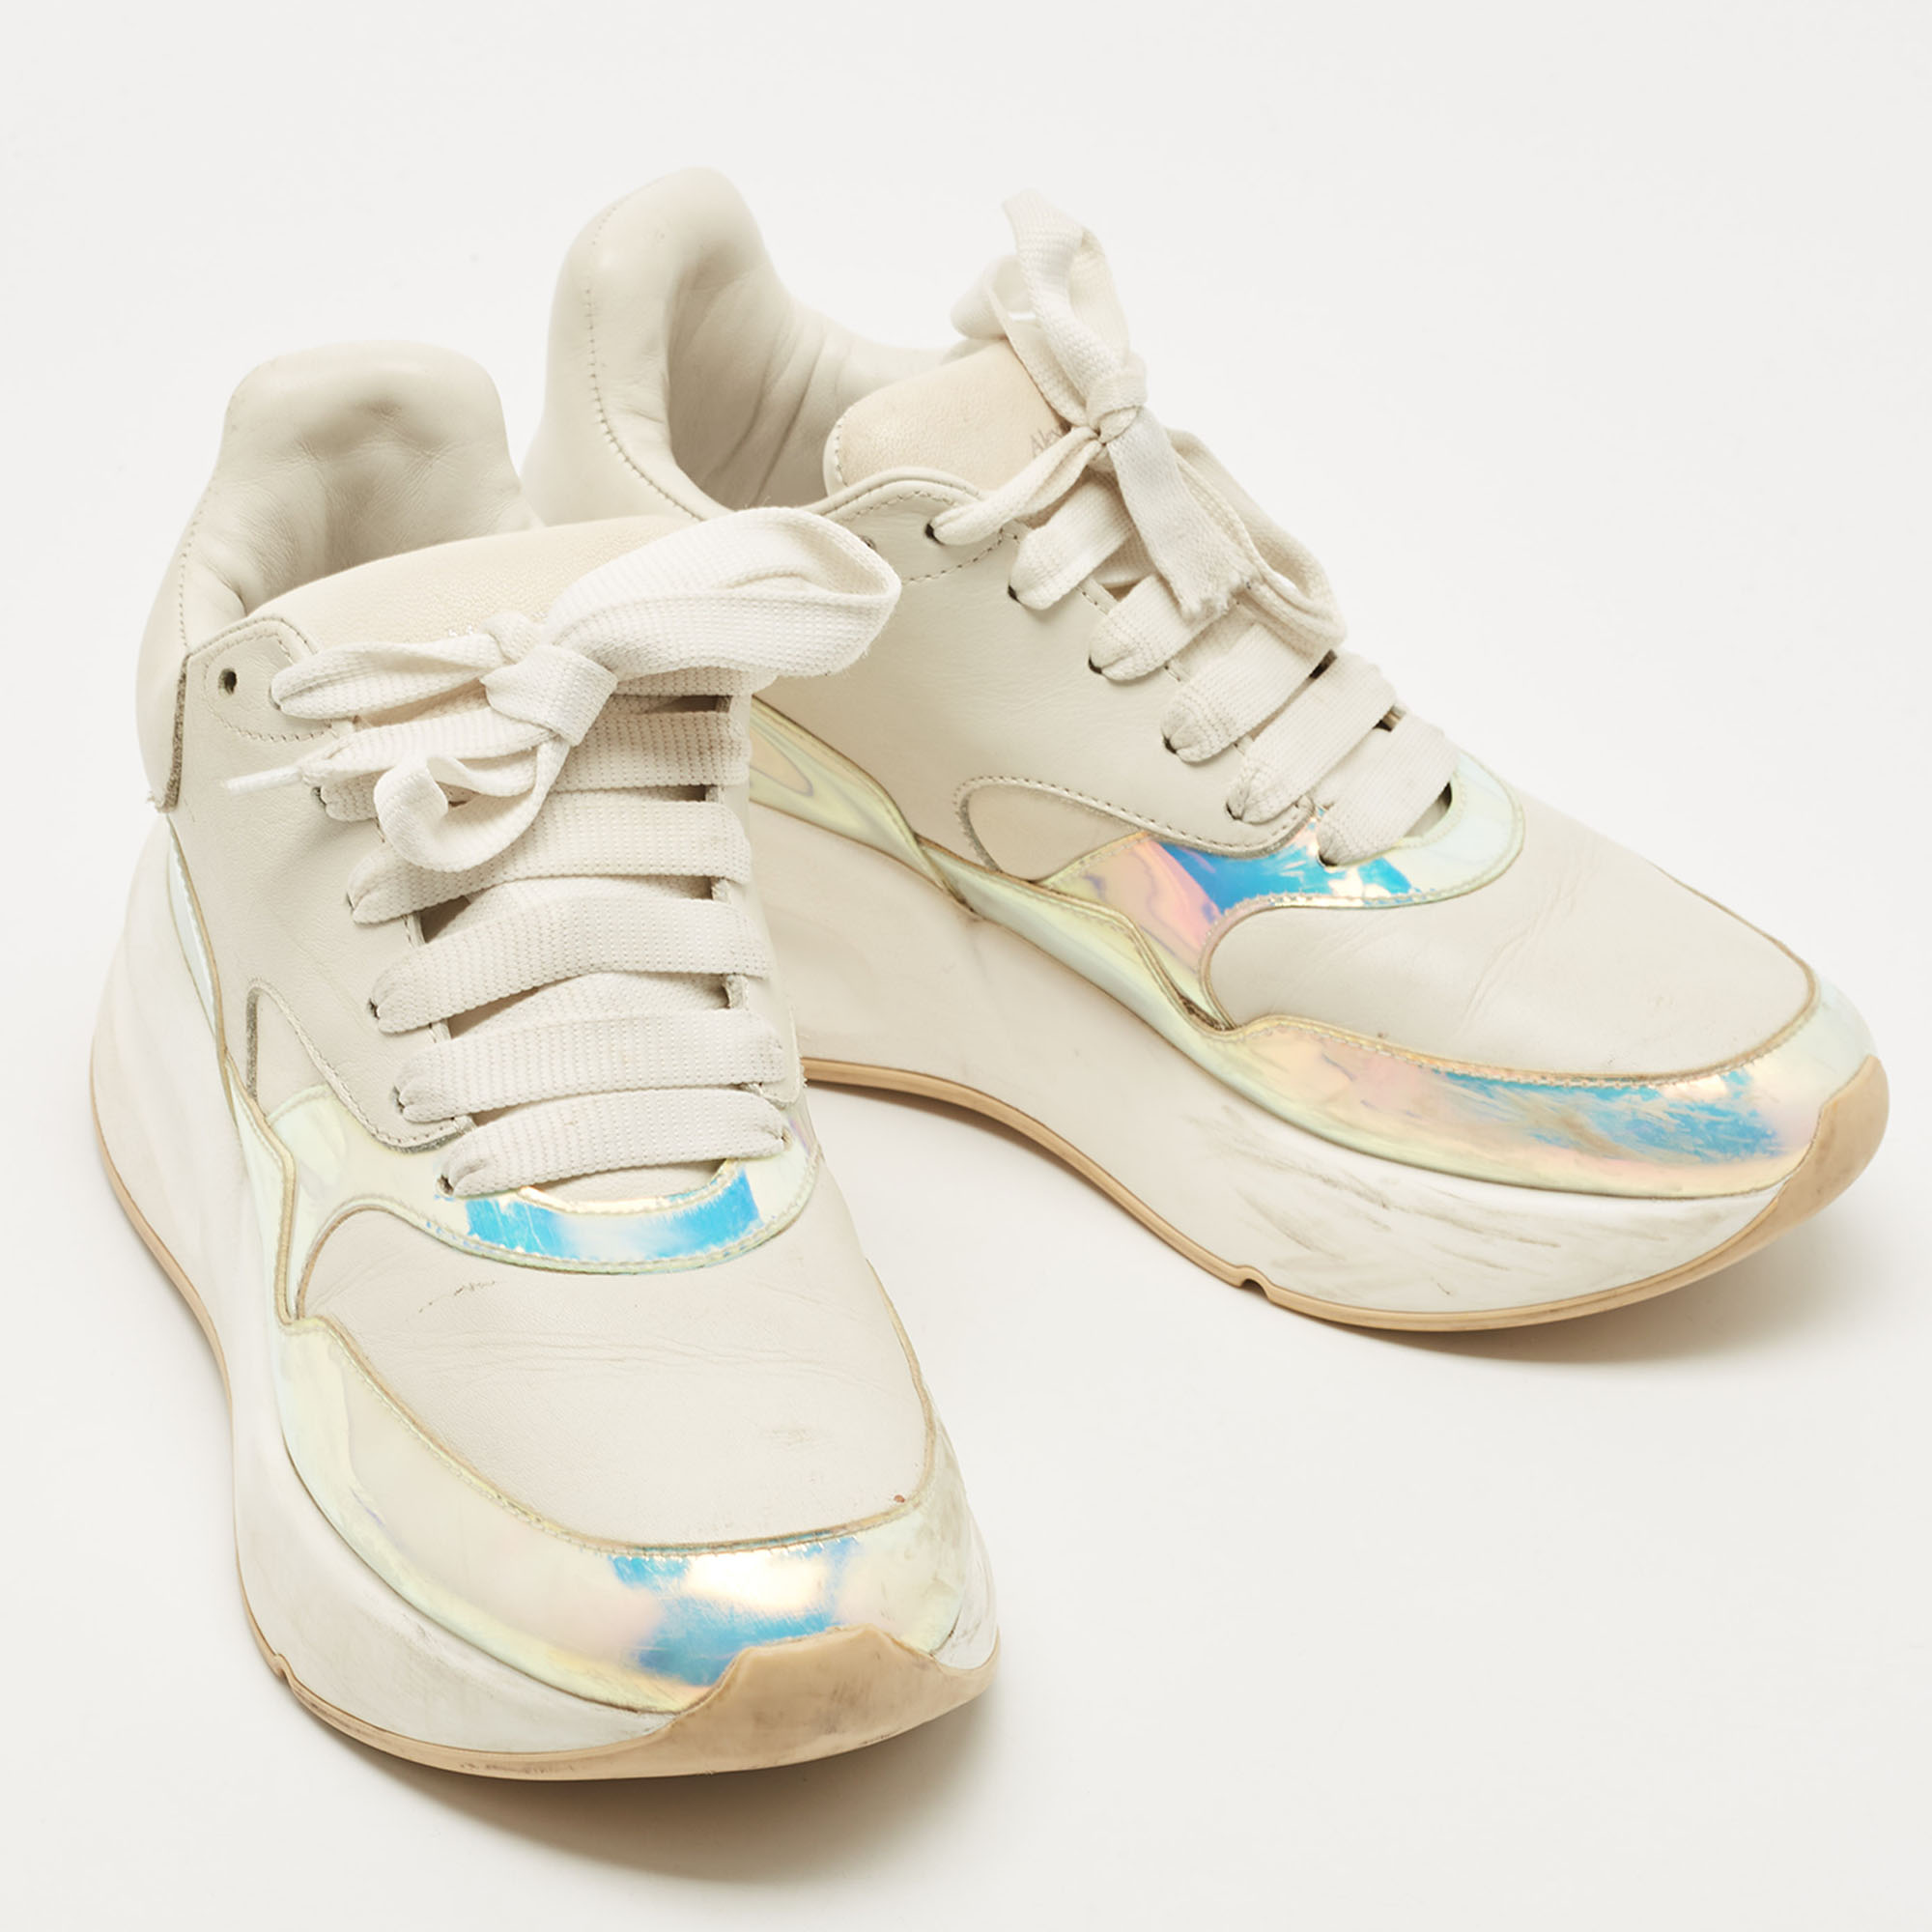 Alexander McQueen White Leather And Iridescent PVC Chunky Sneakers Size 38